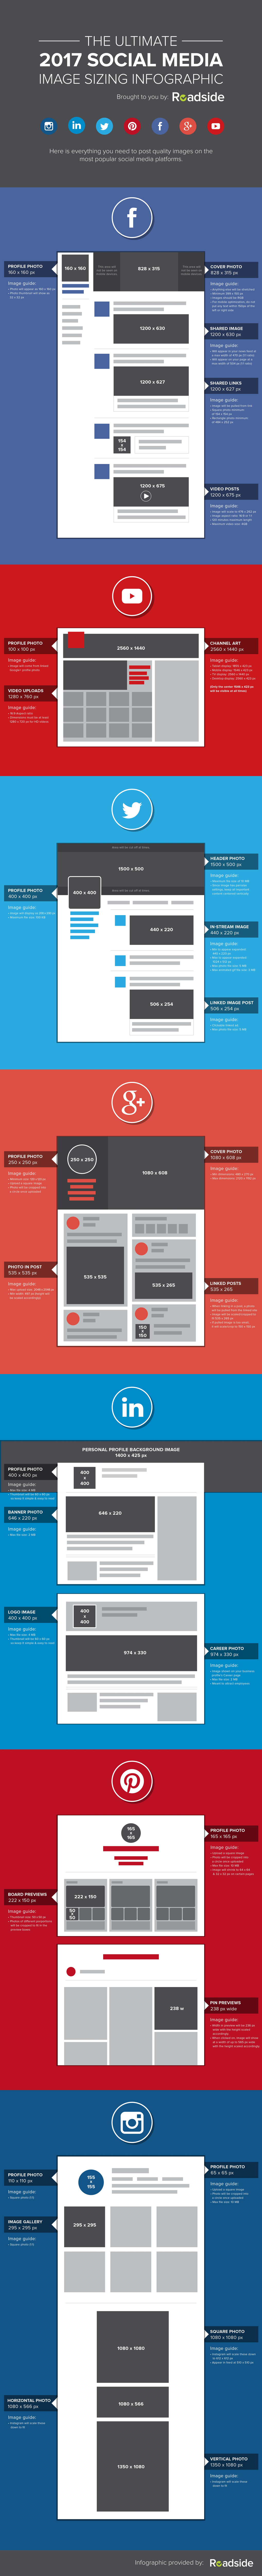 Social media image size cheat sheet for Facebook and more